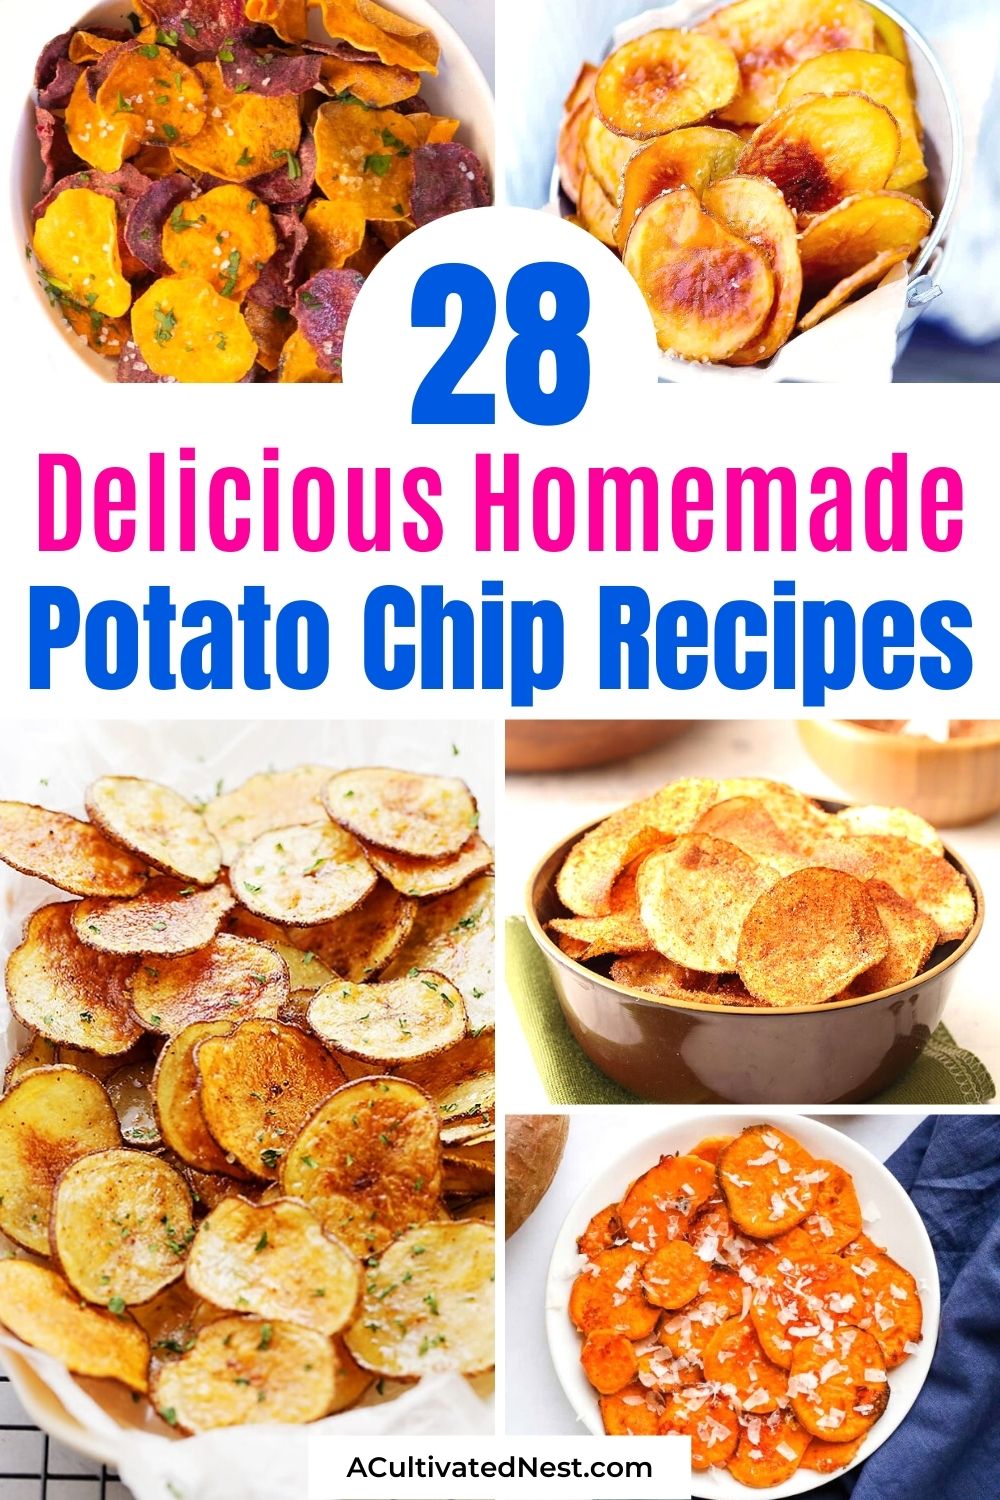 28 Delicious Homemade Potato Chip Recipes- Making your own homemade potato chips is really easy to do, and they're so fun to customize! Here are 28 delicious recipes for you to try! | #recipes #potatoChips #homemadeChips #snacks #ACultivatedNest